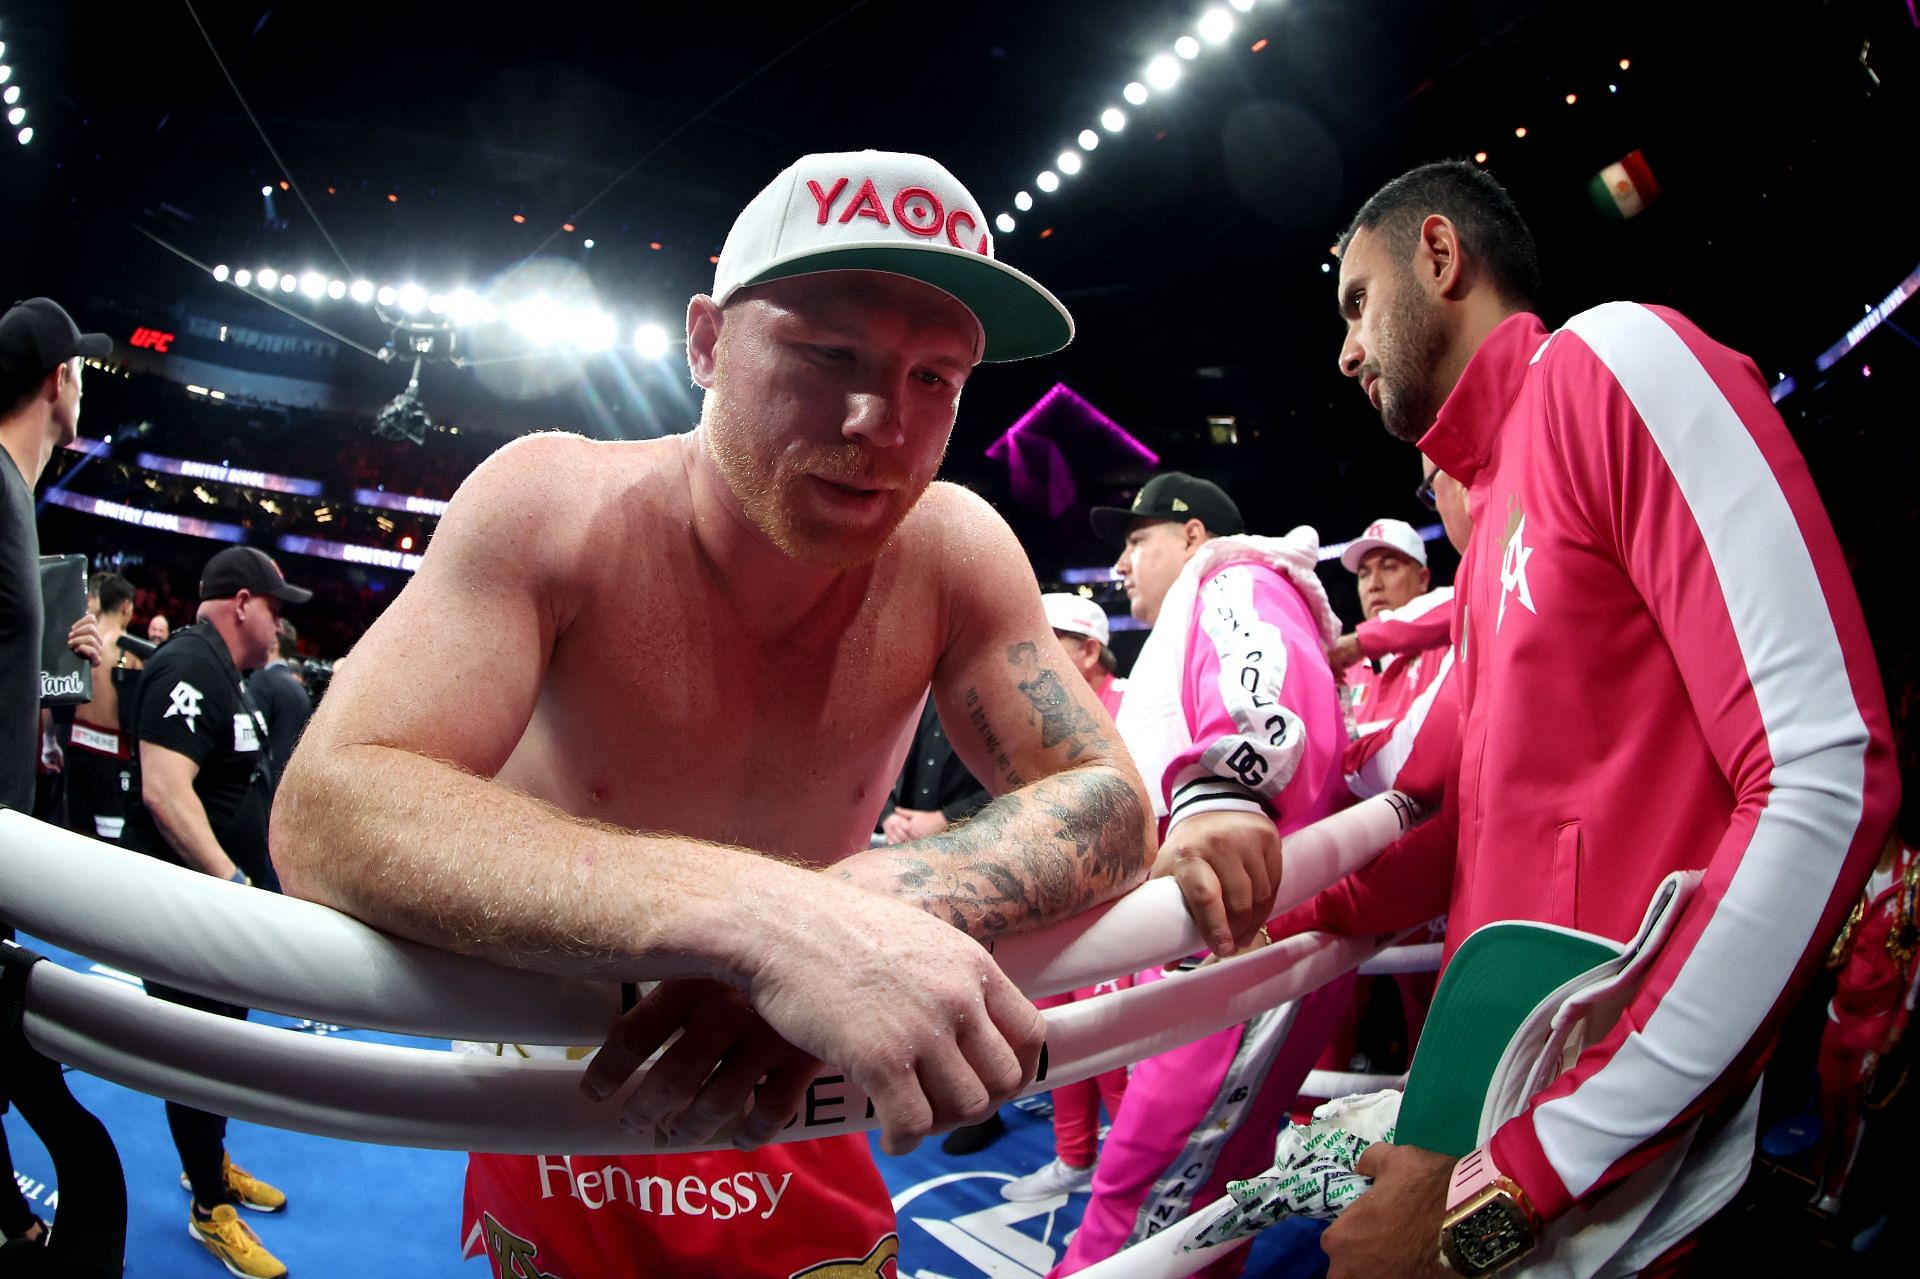 Canelo Alvarez reacts after WBA Light Heavyweight title fight against Dmitry Bivol at T-Mobile Arena on May 07, 2022 in Las Vegas, Nevada.